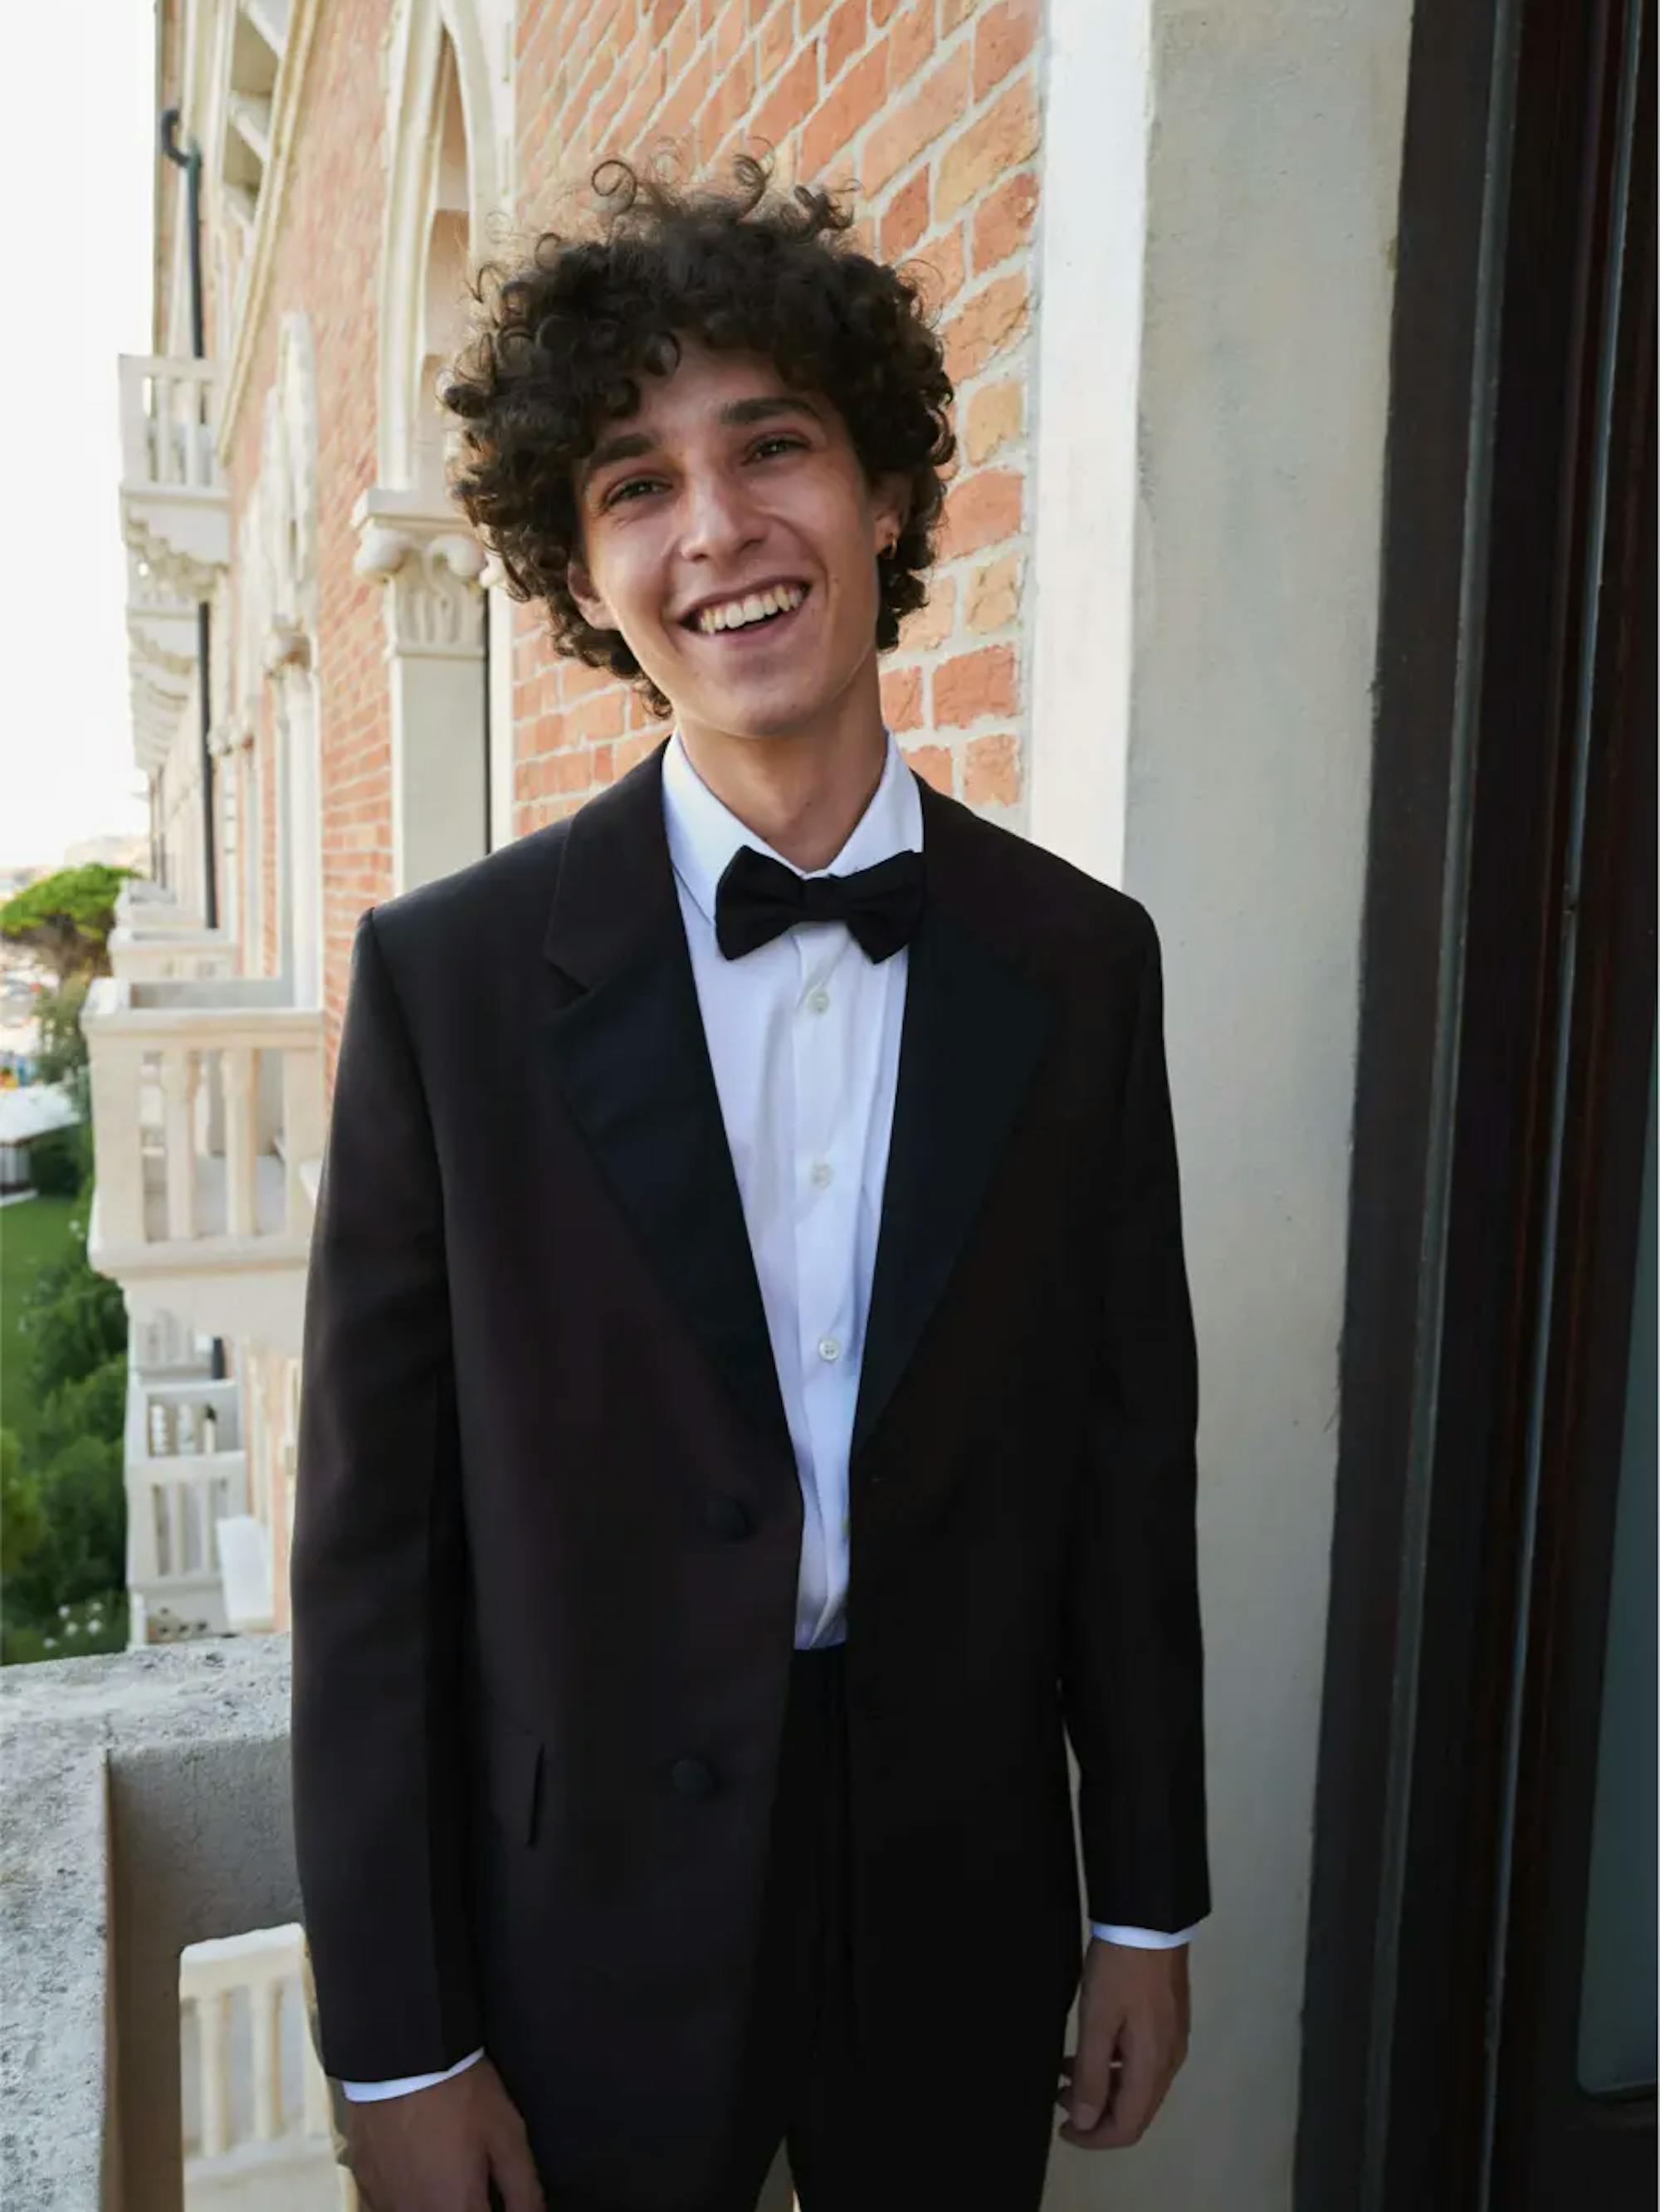 Filippo Scotti wears a tux and bowtie and smiles as he stands on a balcony.